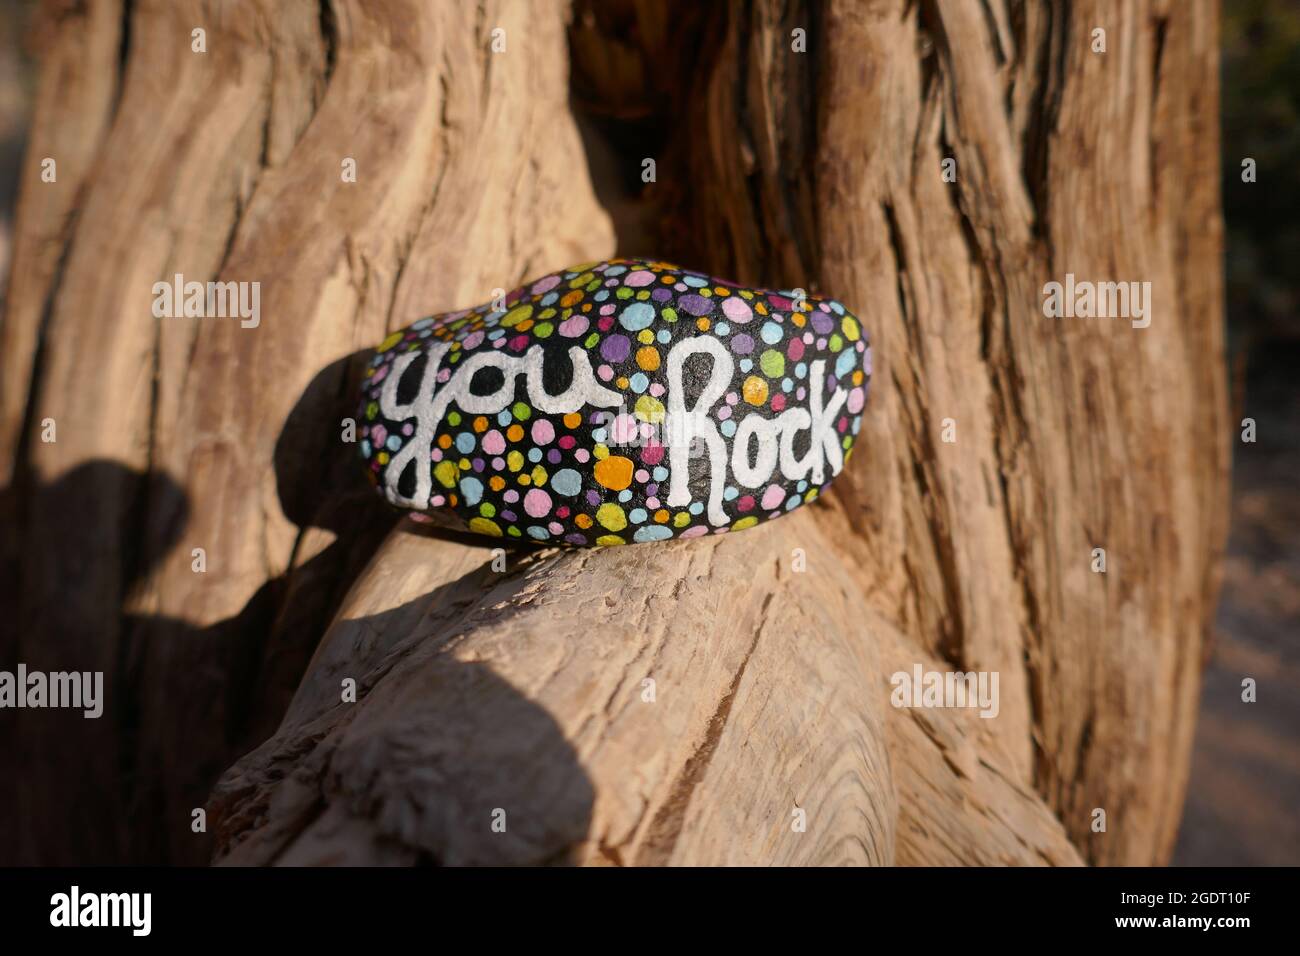 Dead tree in arid climate with you rock kindness rock Stock Photo